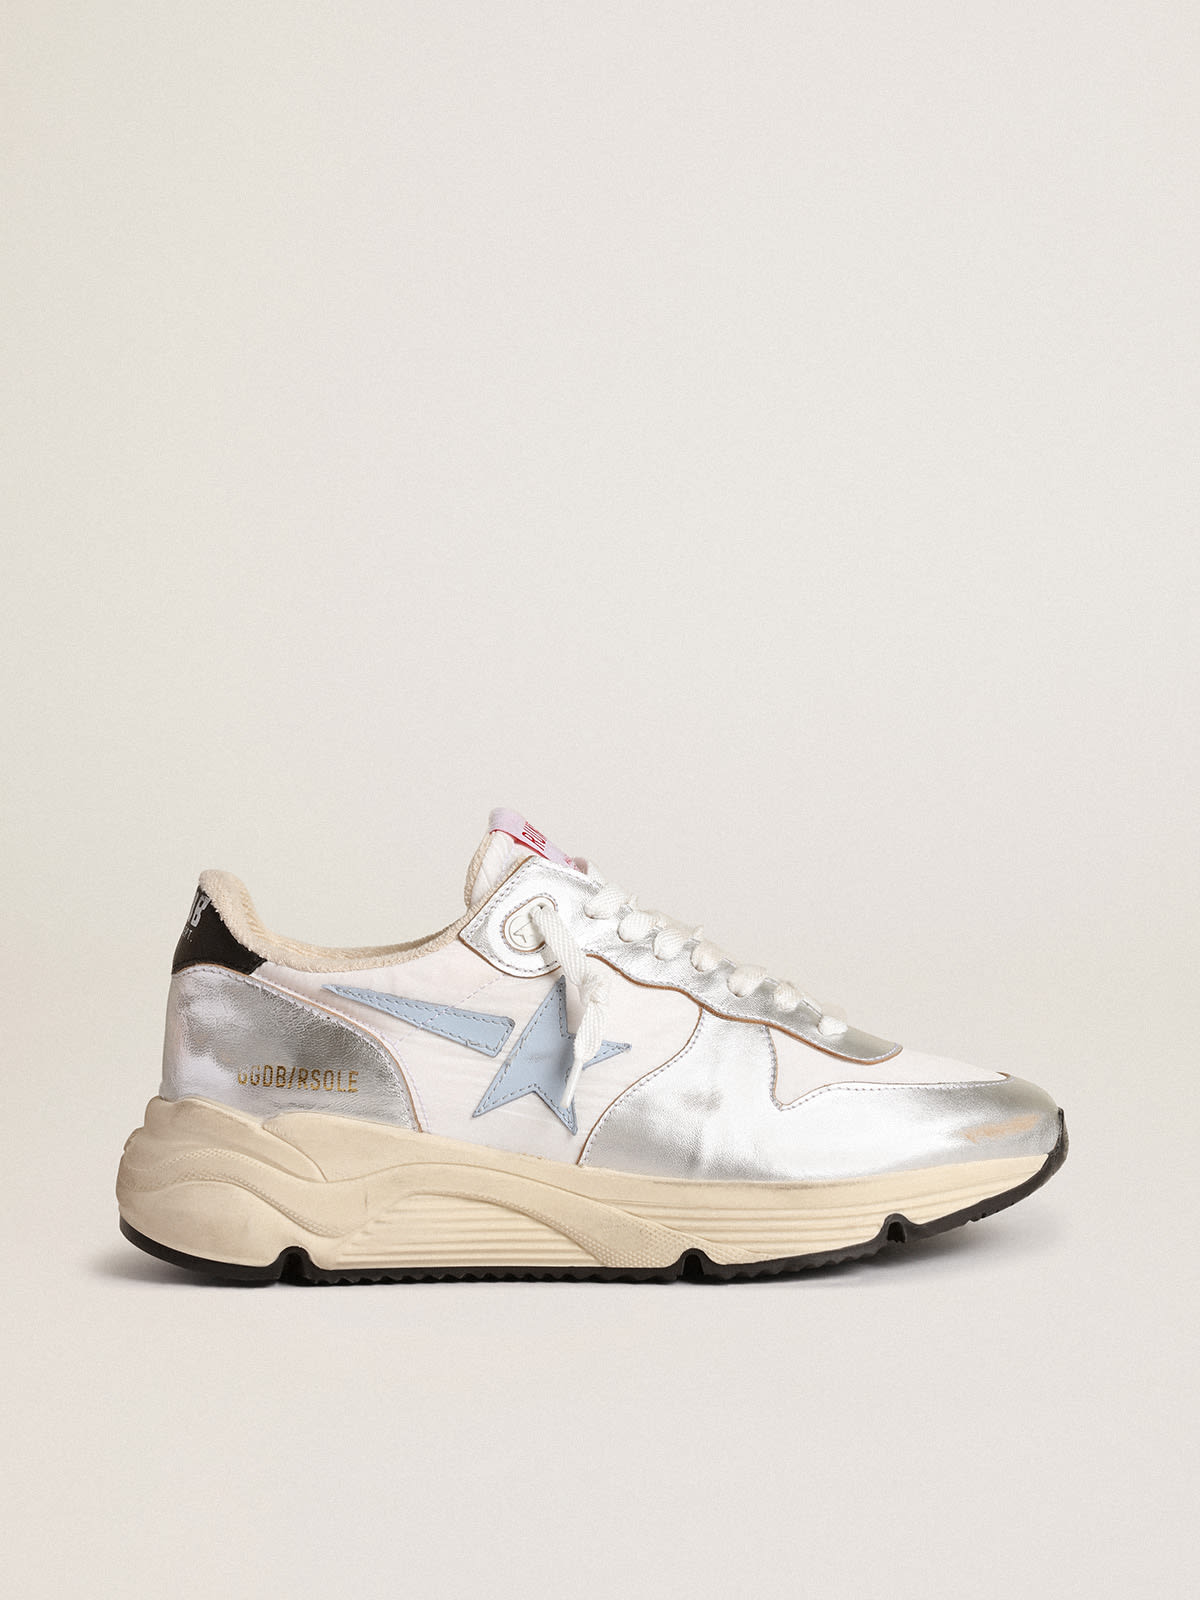 Golden Goose - Running Sole in nylon and silver metallic leather with light blue star in 